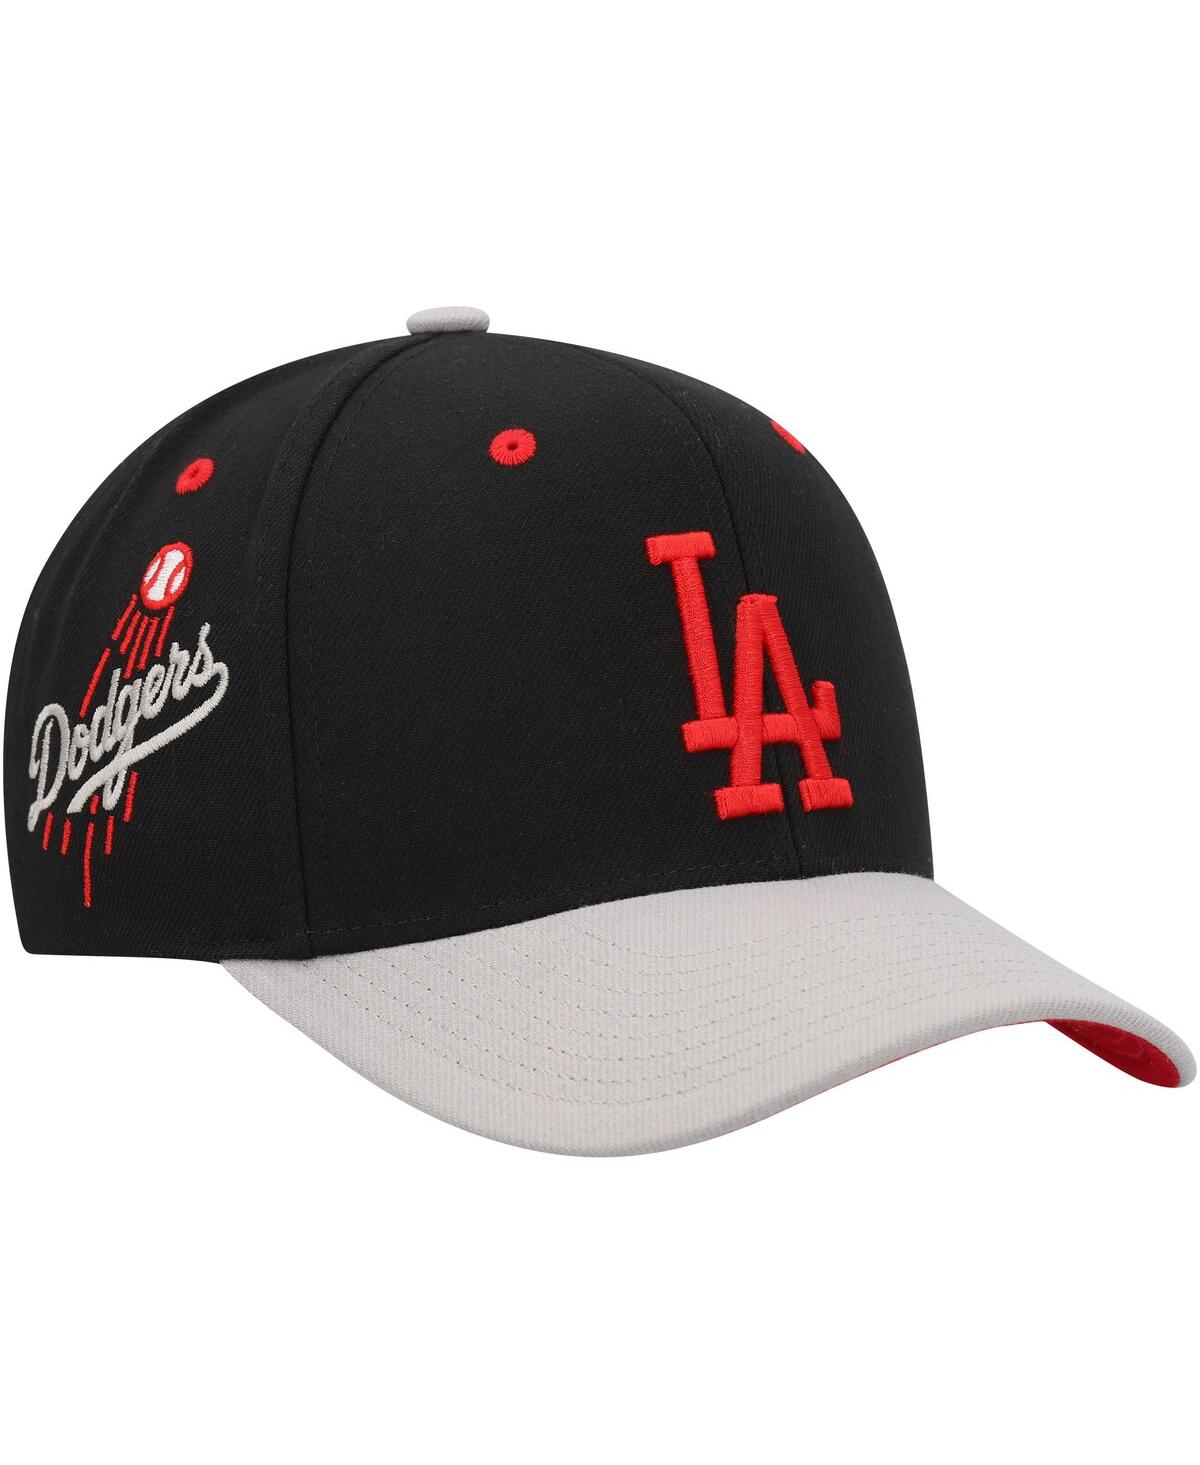 MITCHELL & NESS MEN'S MITCHELL & NESS BLACK LOS ANGELES DODGERS BRED PRO ADJUSTABLE HAT